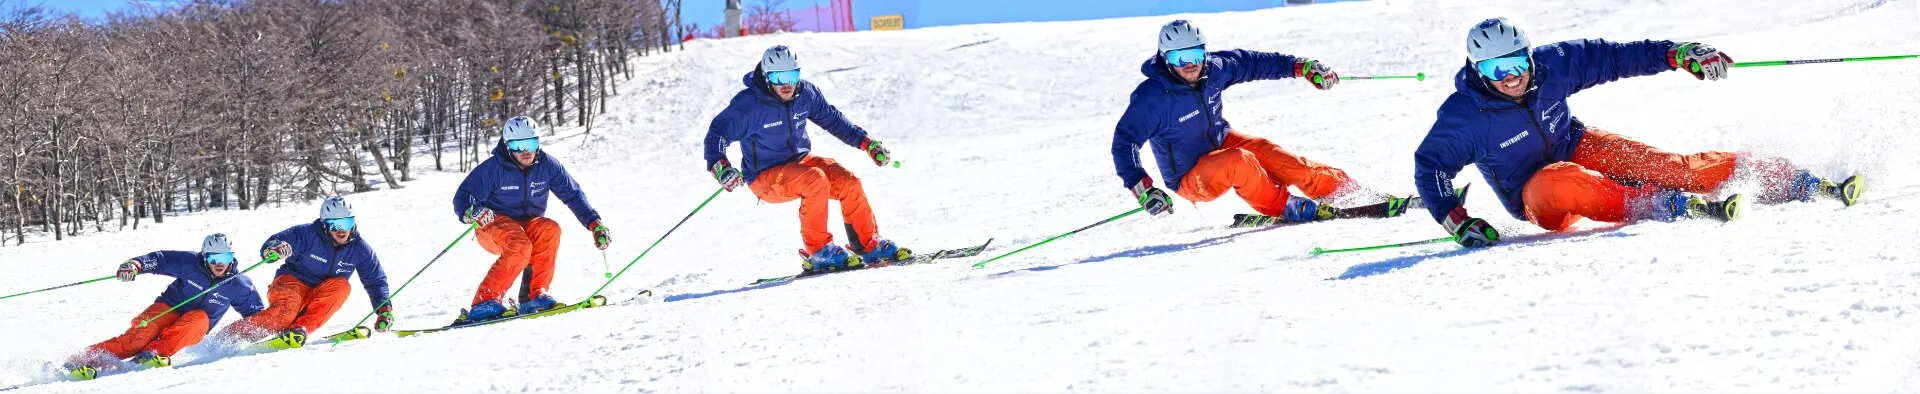 Ski Turn Action Photo Sequence